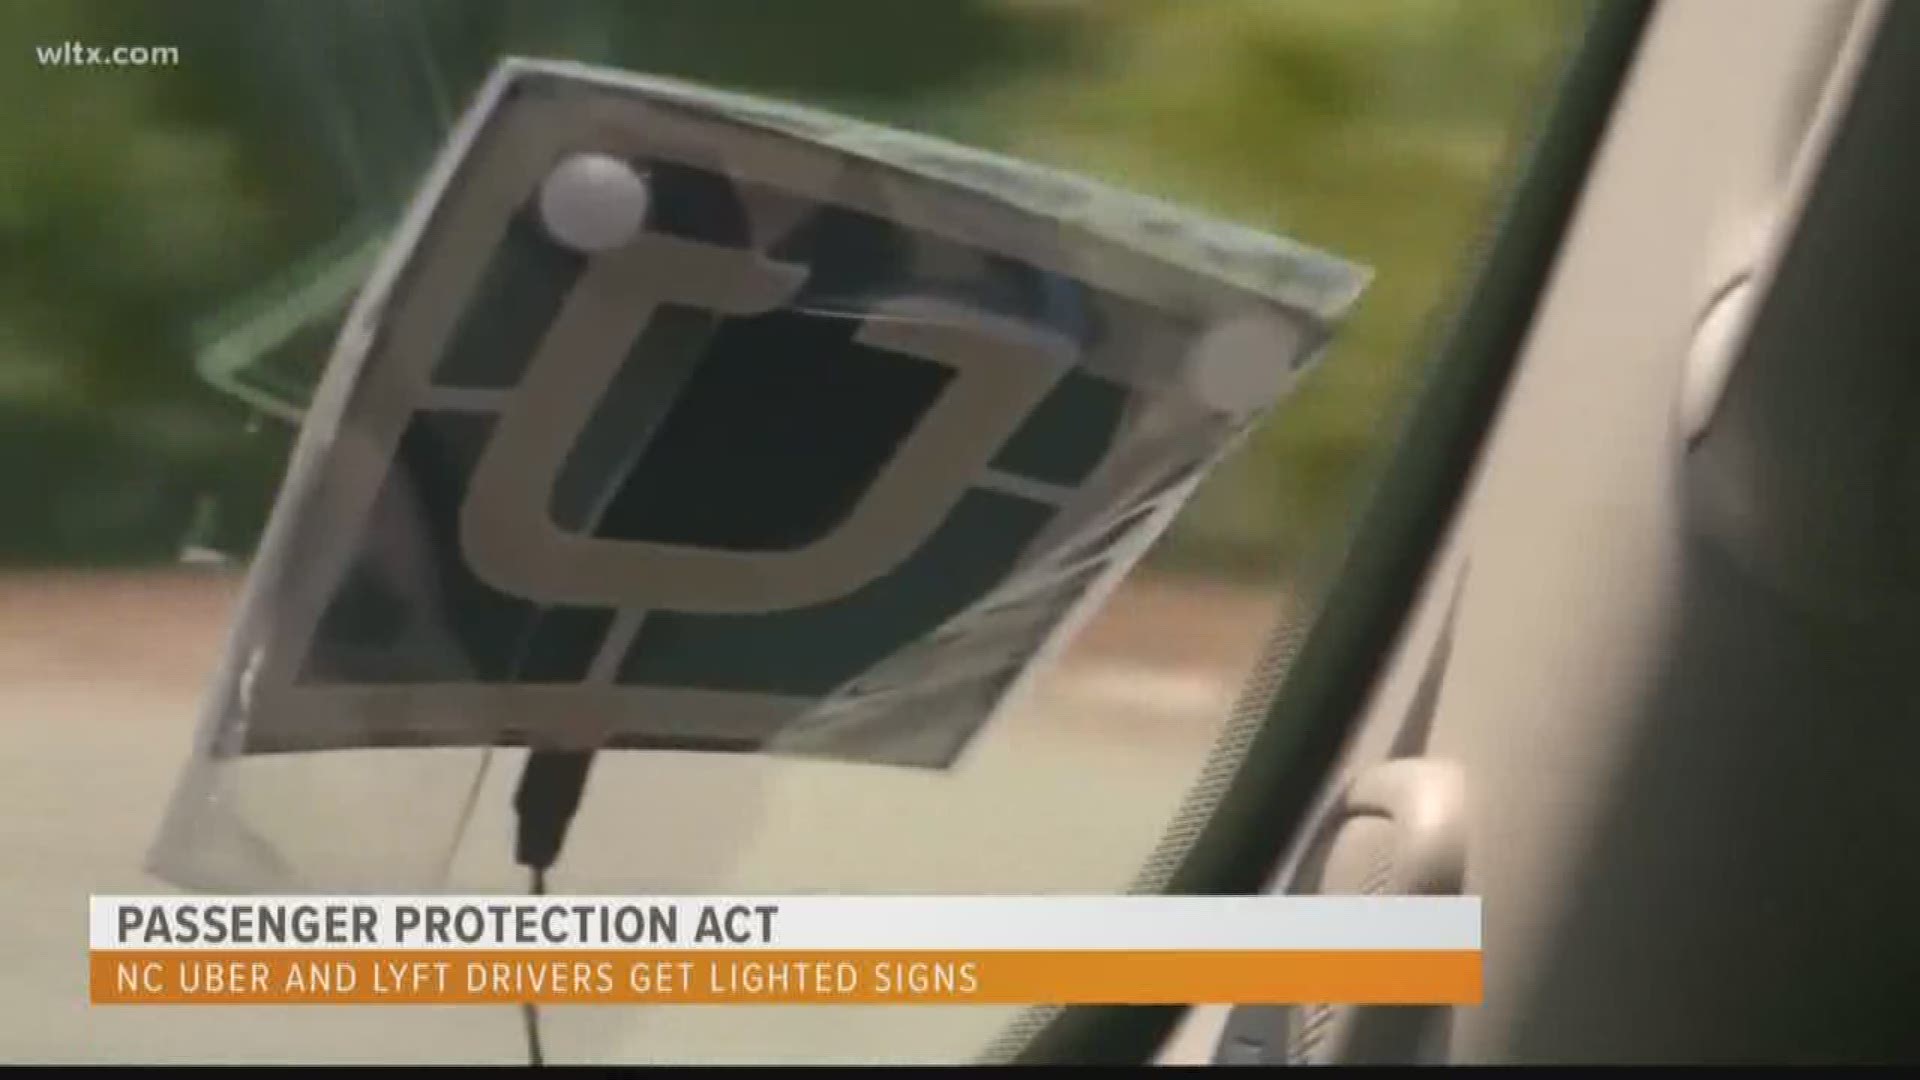 The rideshare companies will need to post the signs by next summer because of a new state law, which is meant to ensure that riders get into the correct car.